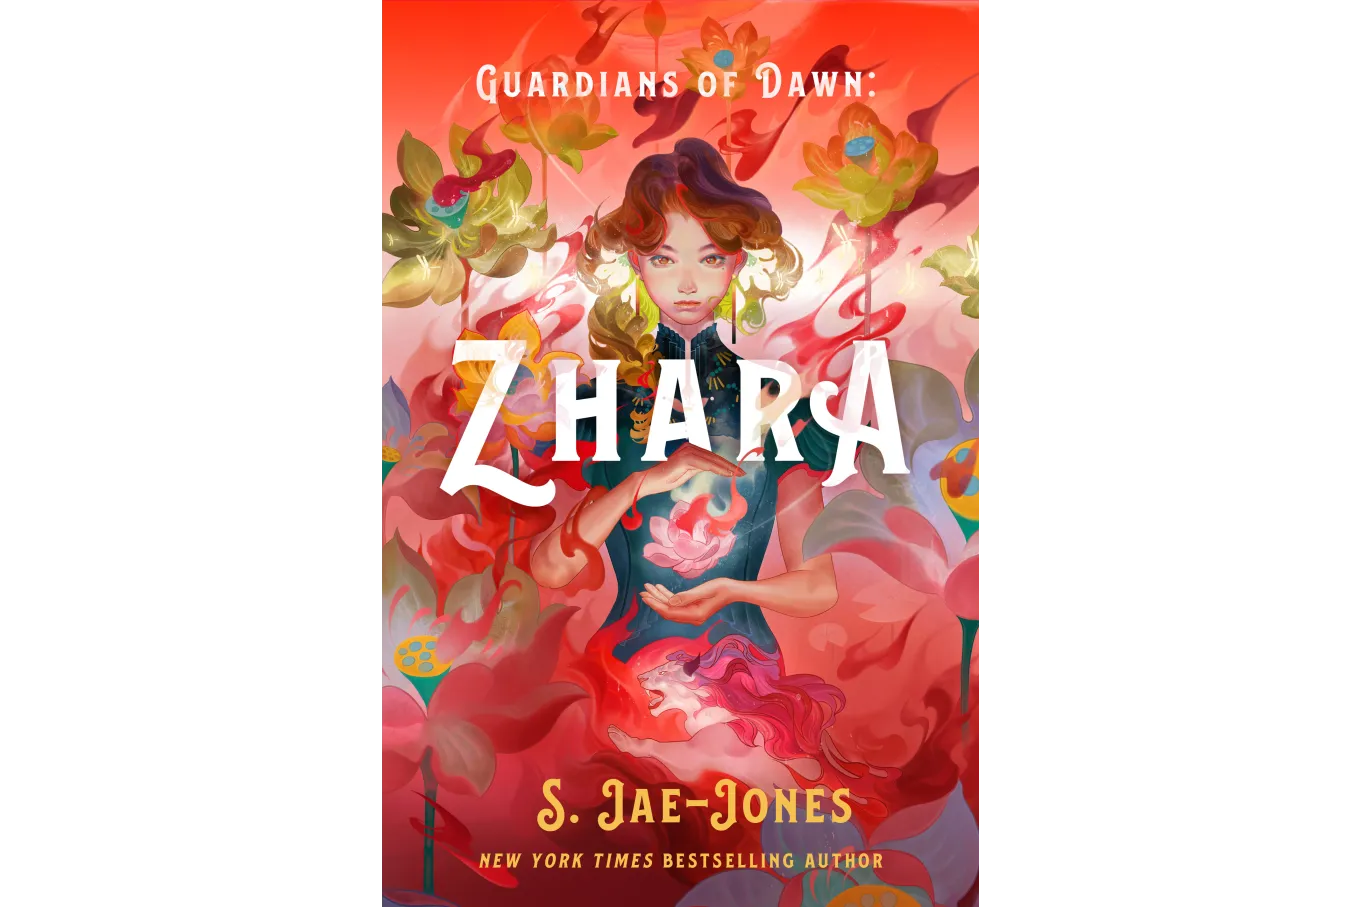 Cover of Zhara